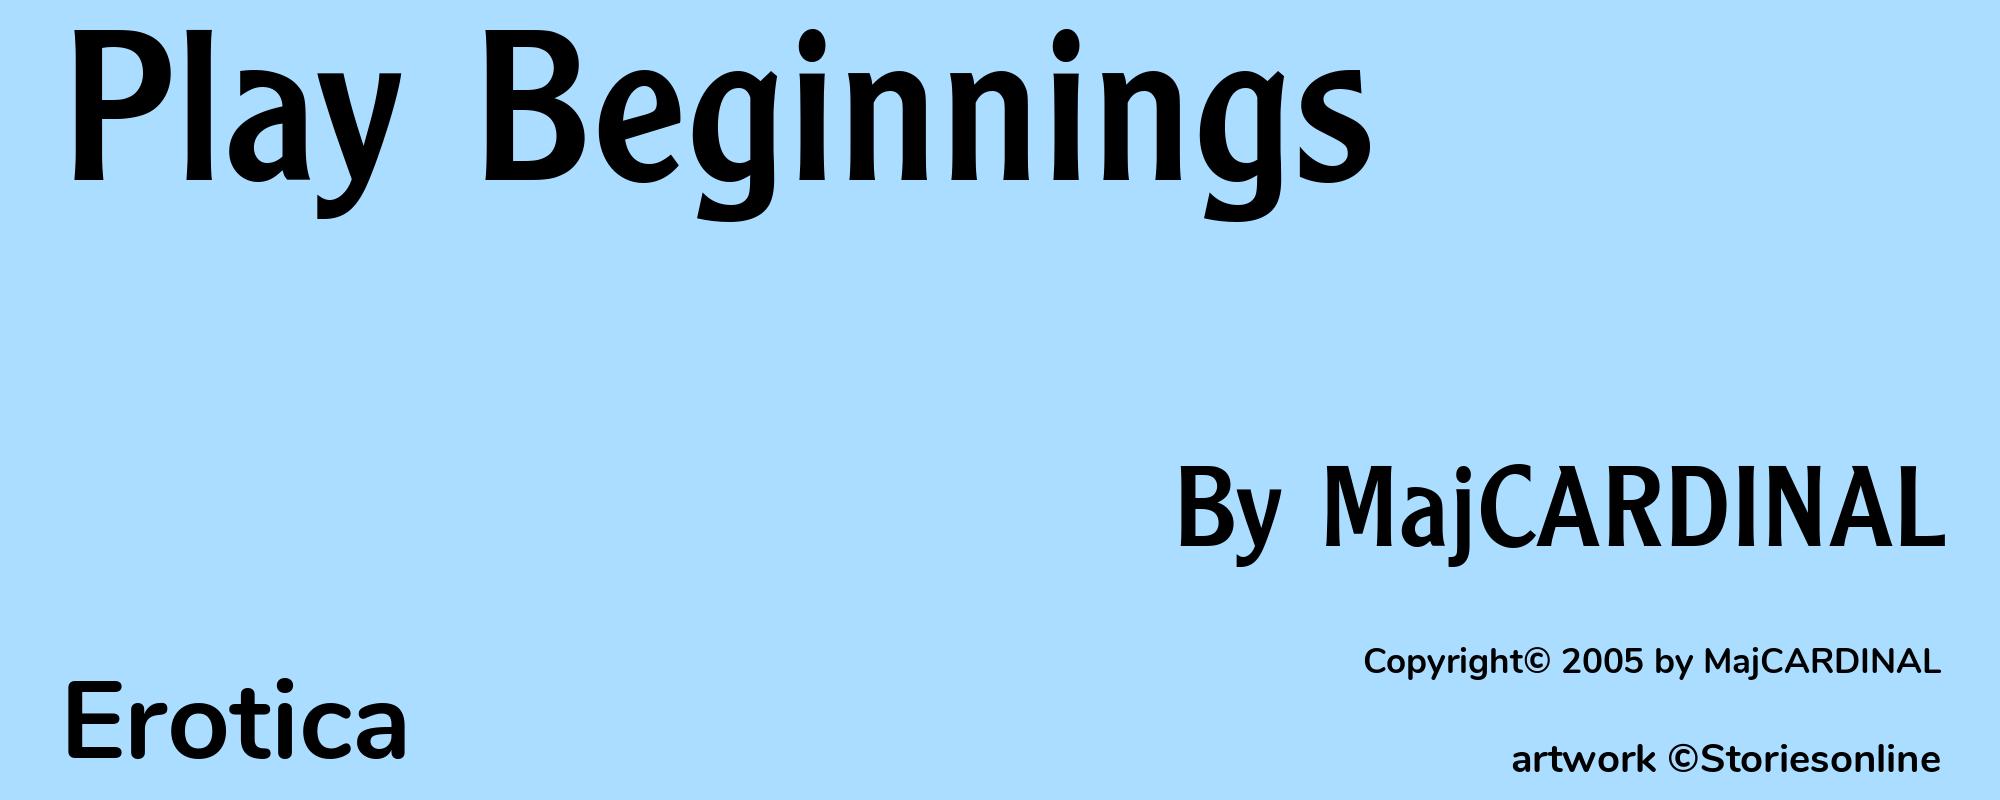 Play Beginnings - Cover